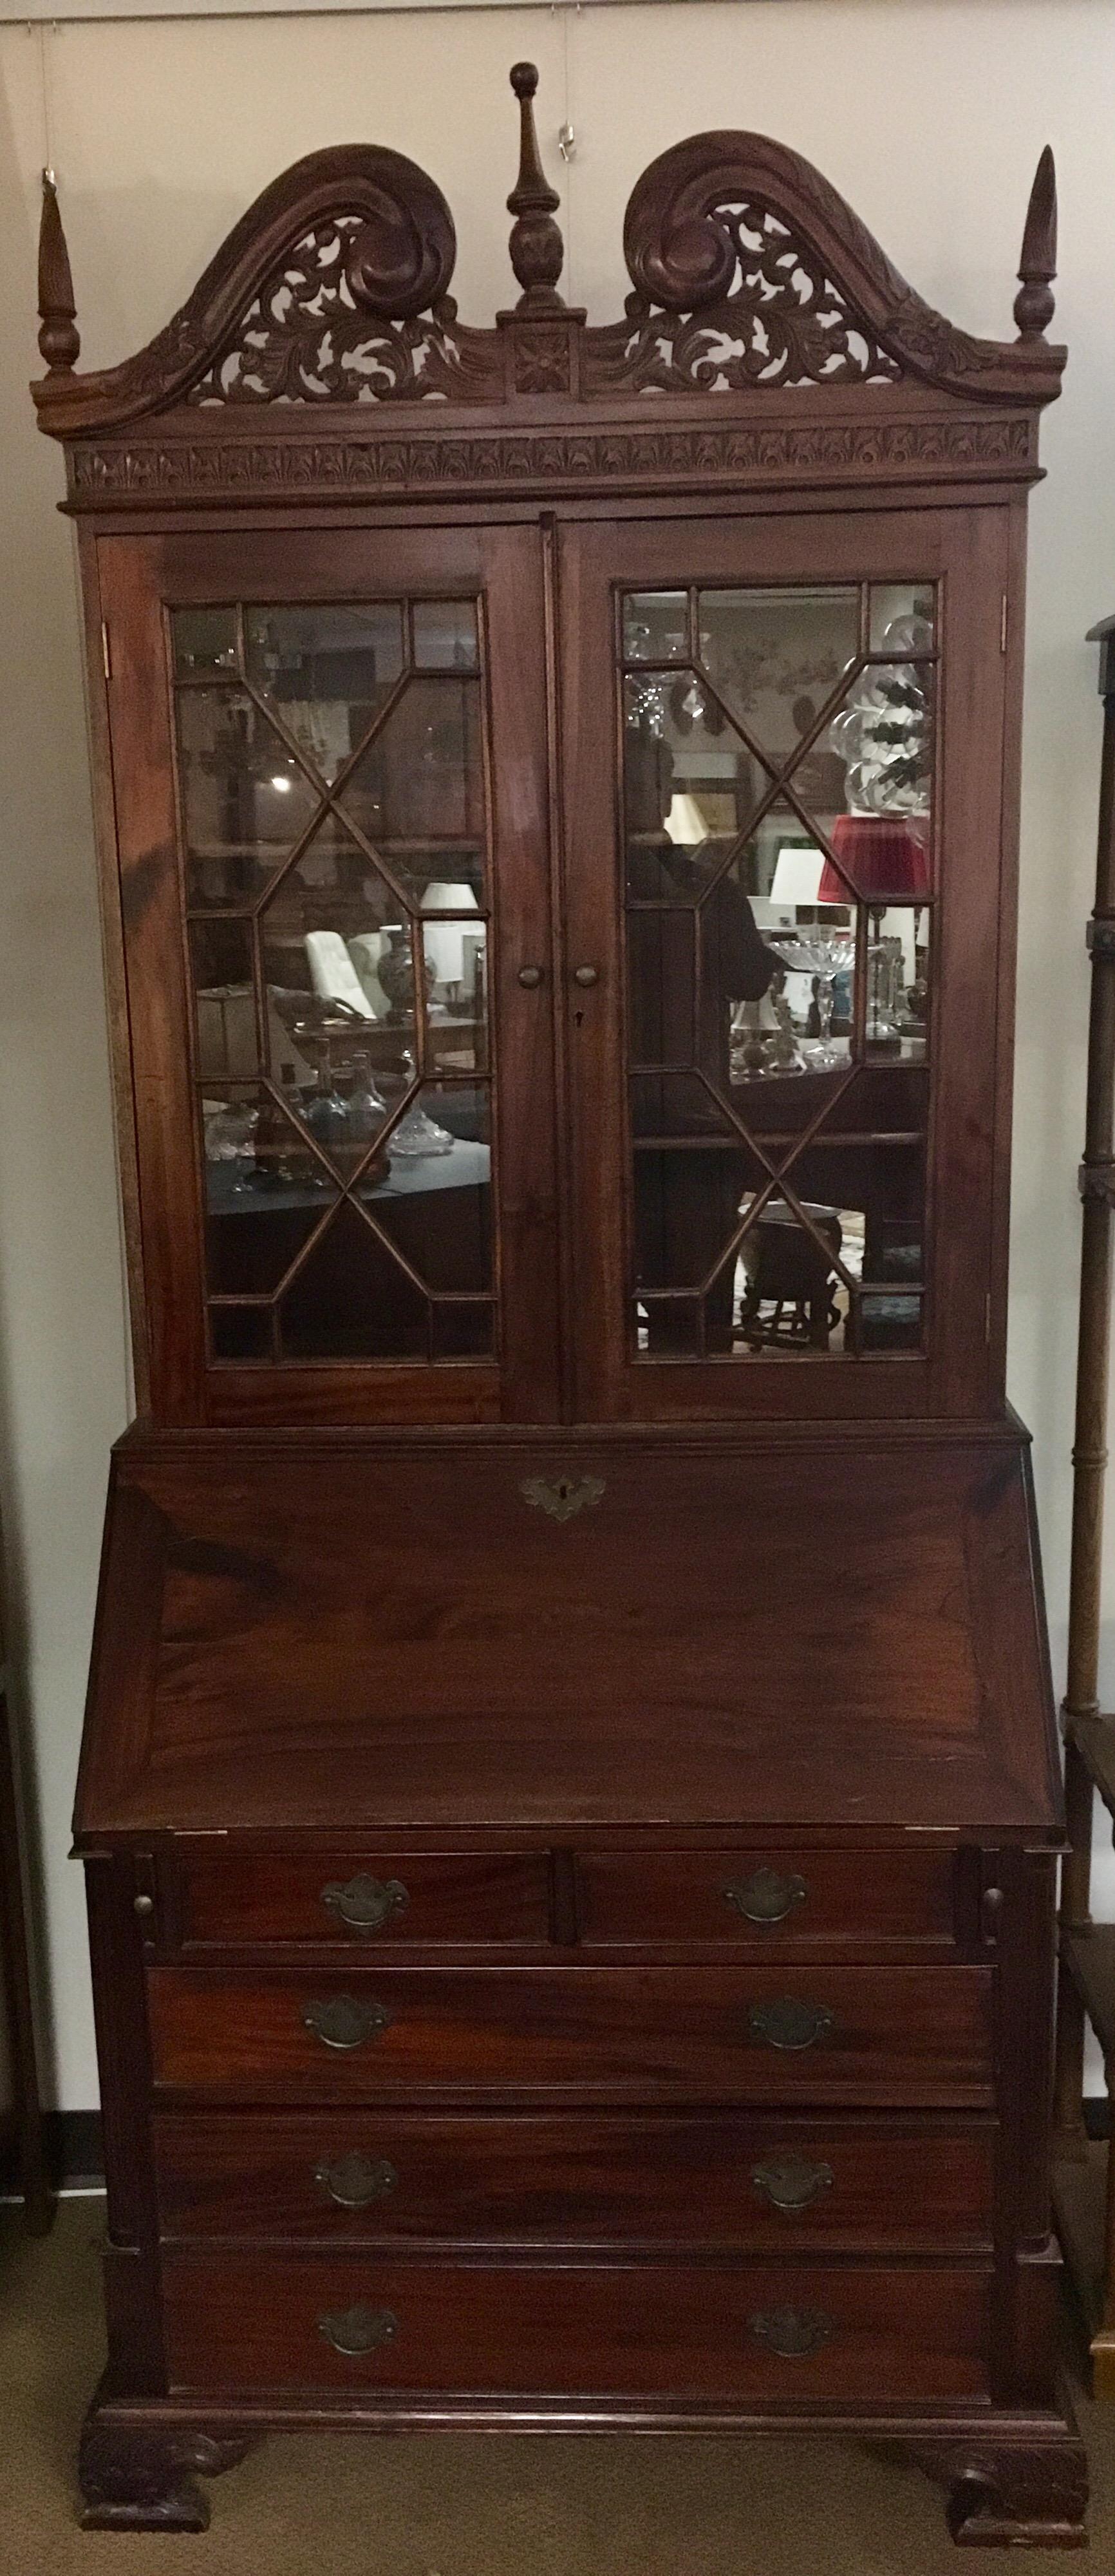 Early George III antique drop front secretary desk with gorgeous detail and multiple drawers and compartments. Features an intricately carved pierced pediment and finials and fretwork ove glass doors.